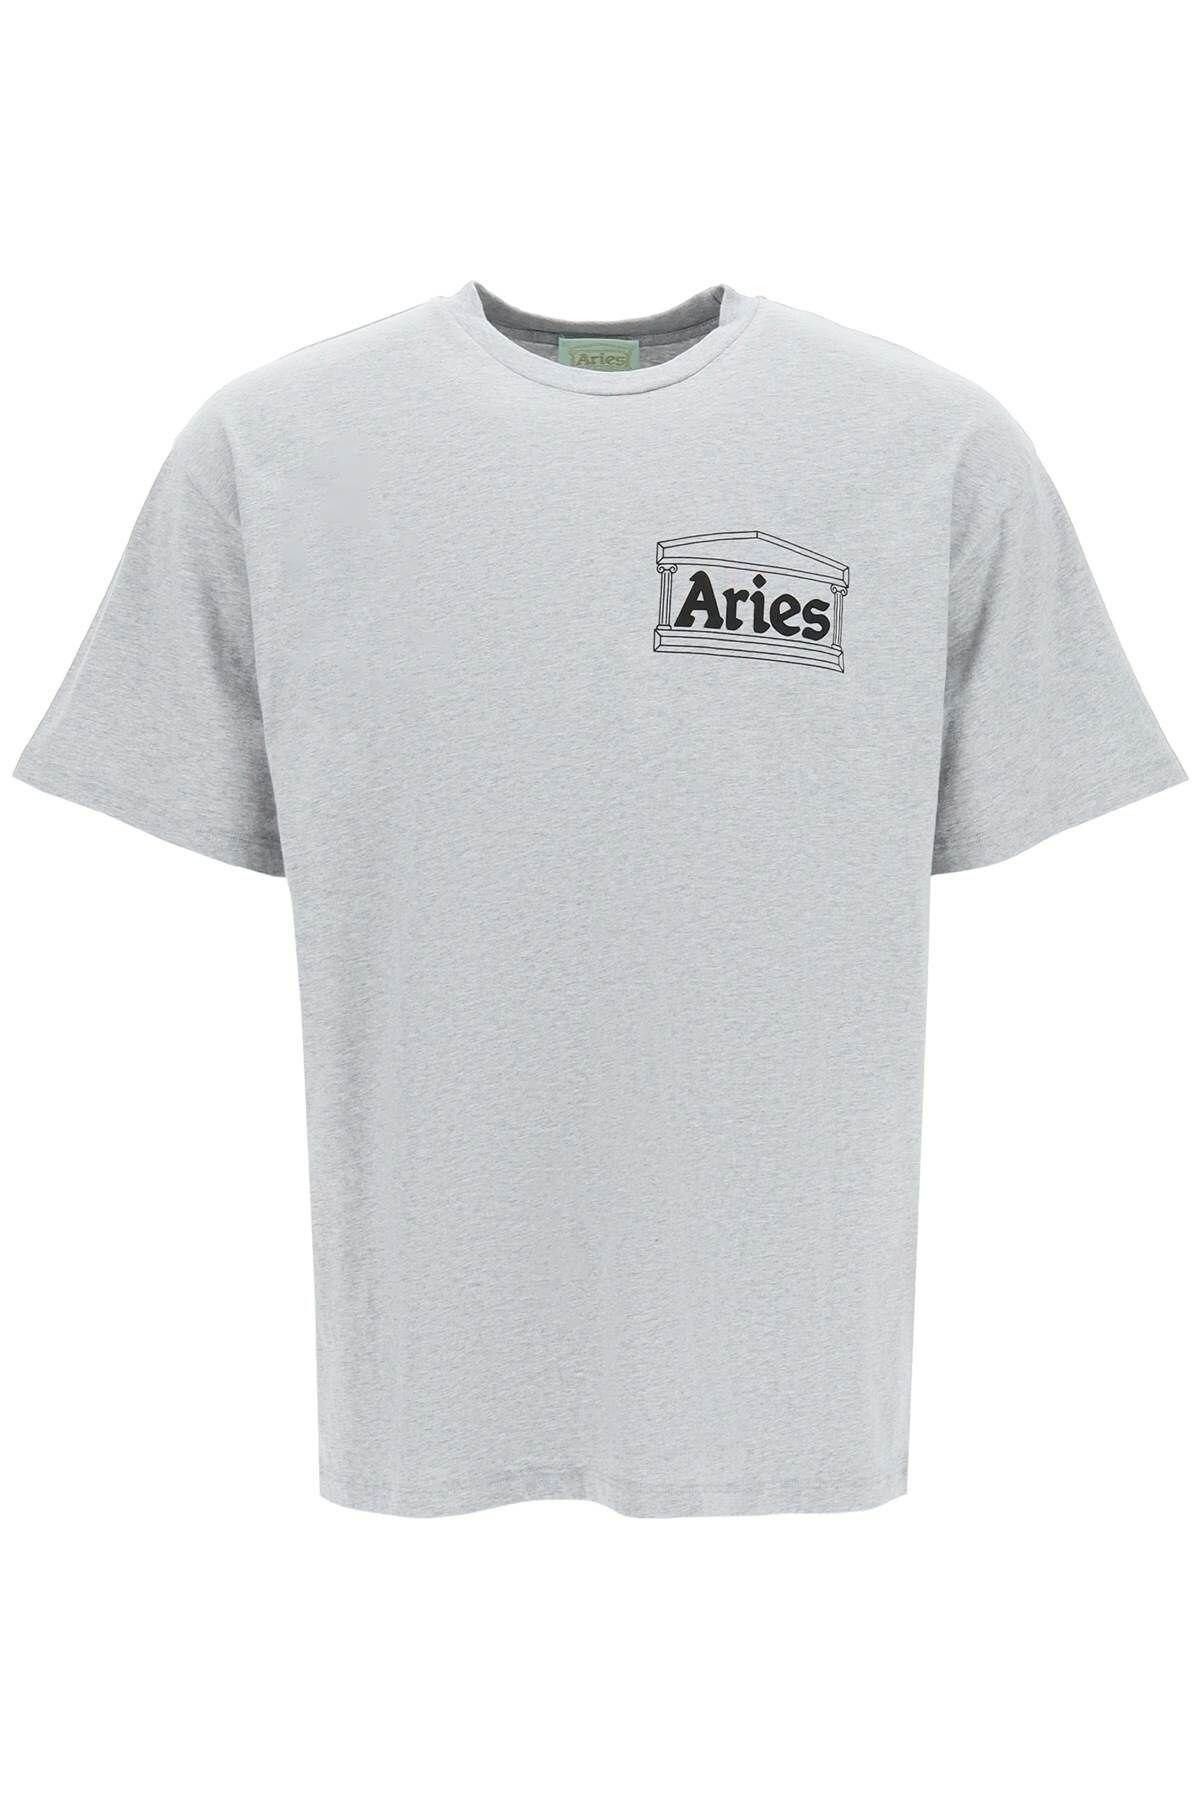 Aries im With T-shirt